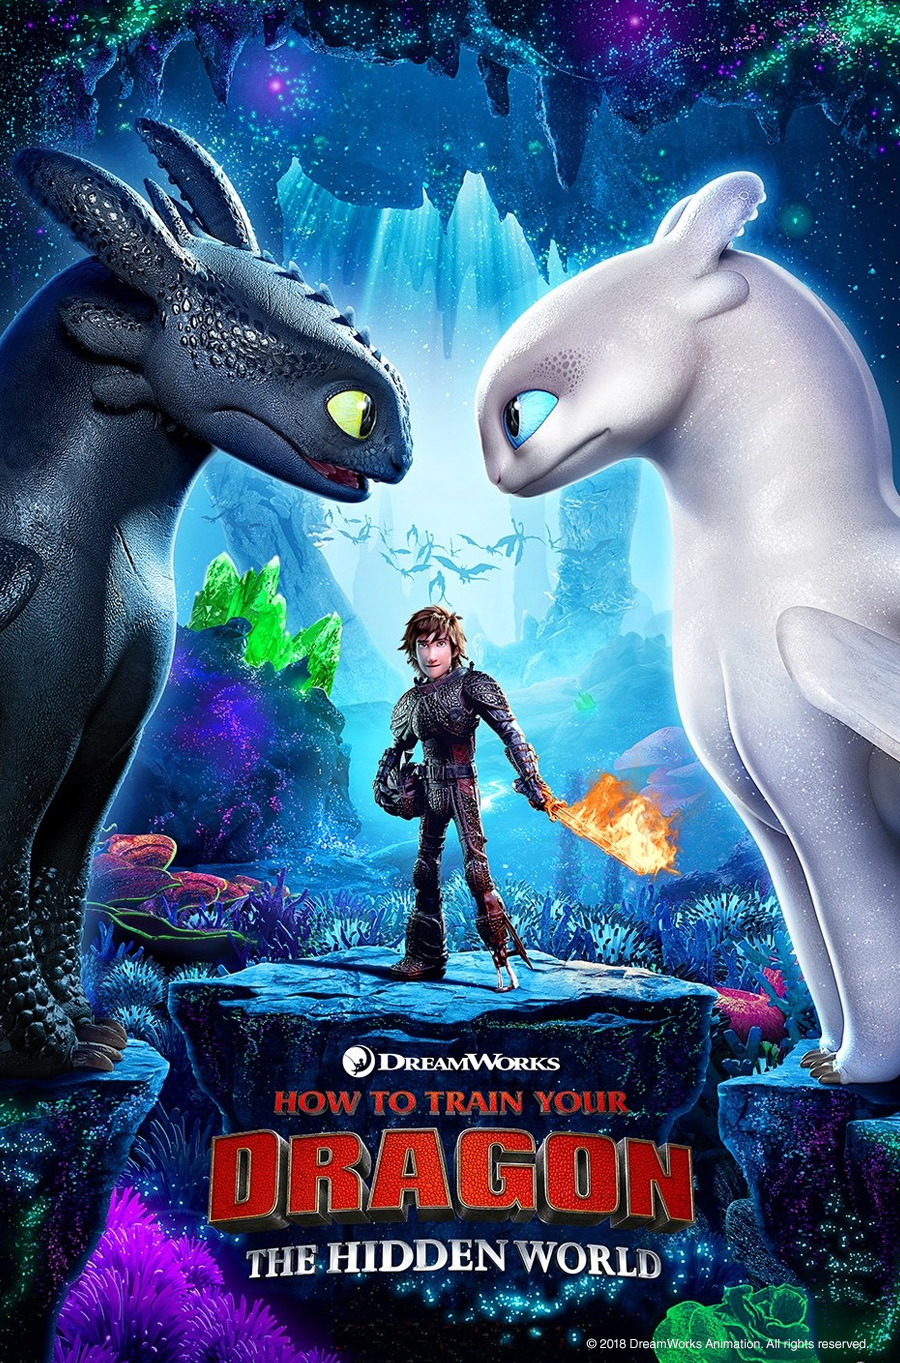 Photo of poster for the film “How to Train Your Dragon—The Hidden World“